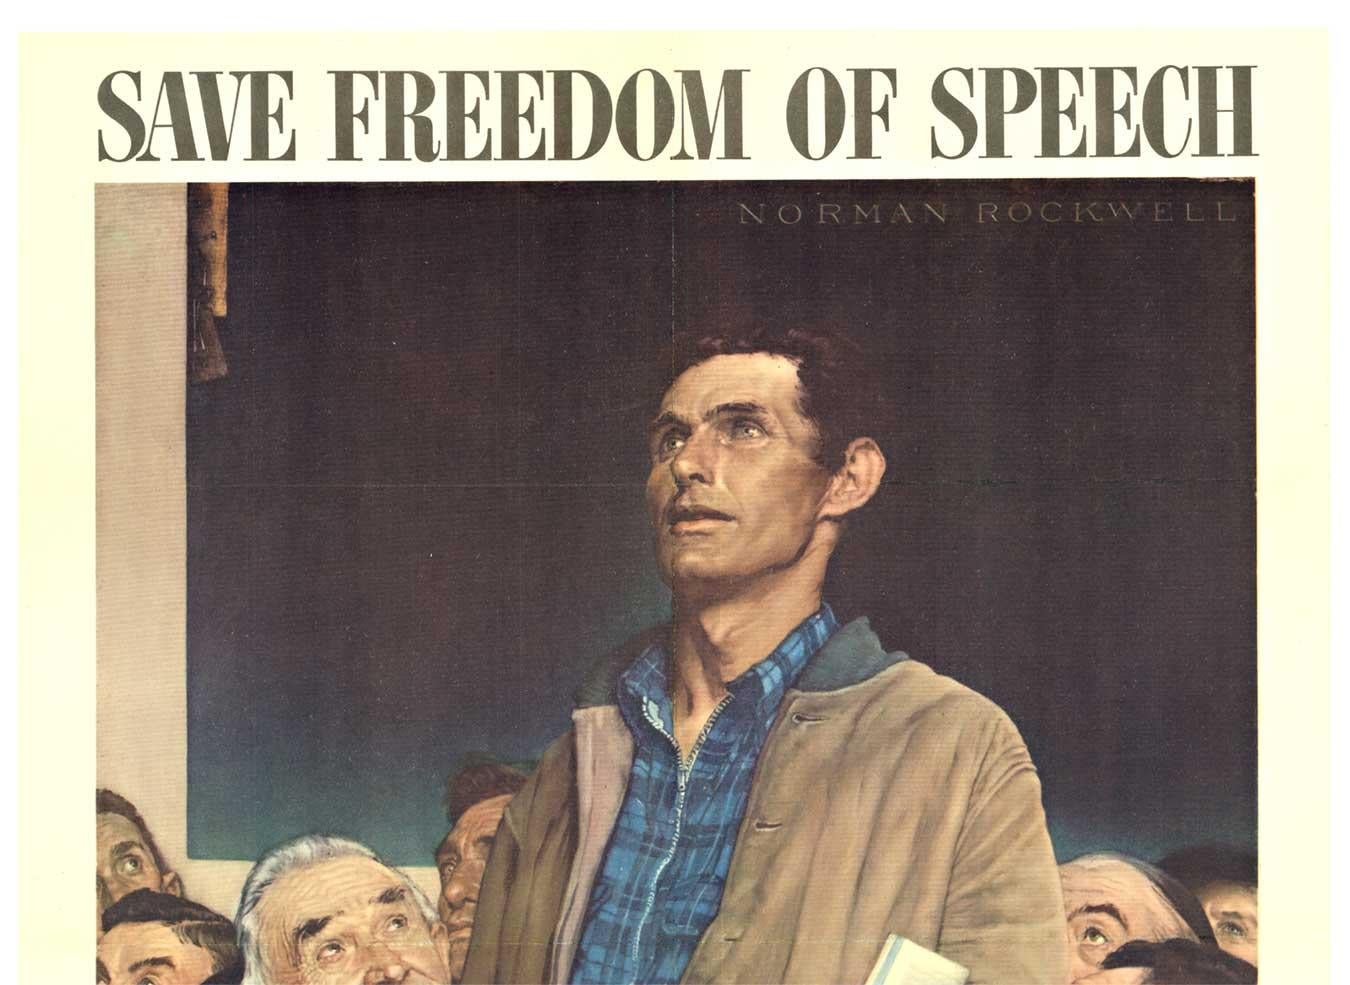 Original Save Freedom of Speech  Buy War Bonds vintage poster - Print by Norman Rockwell